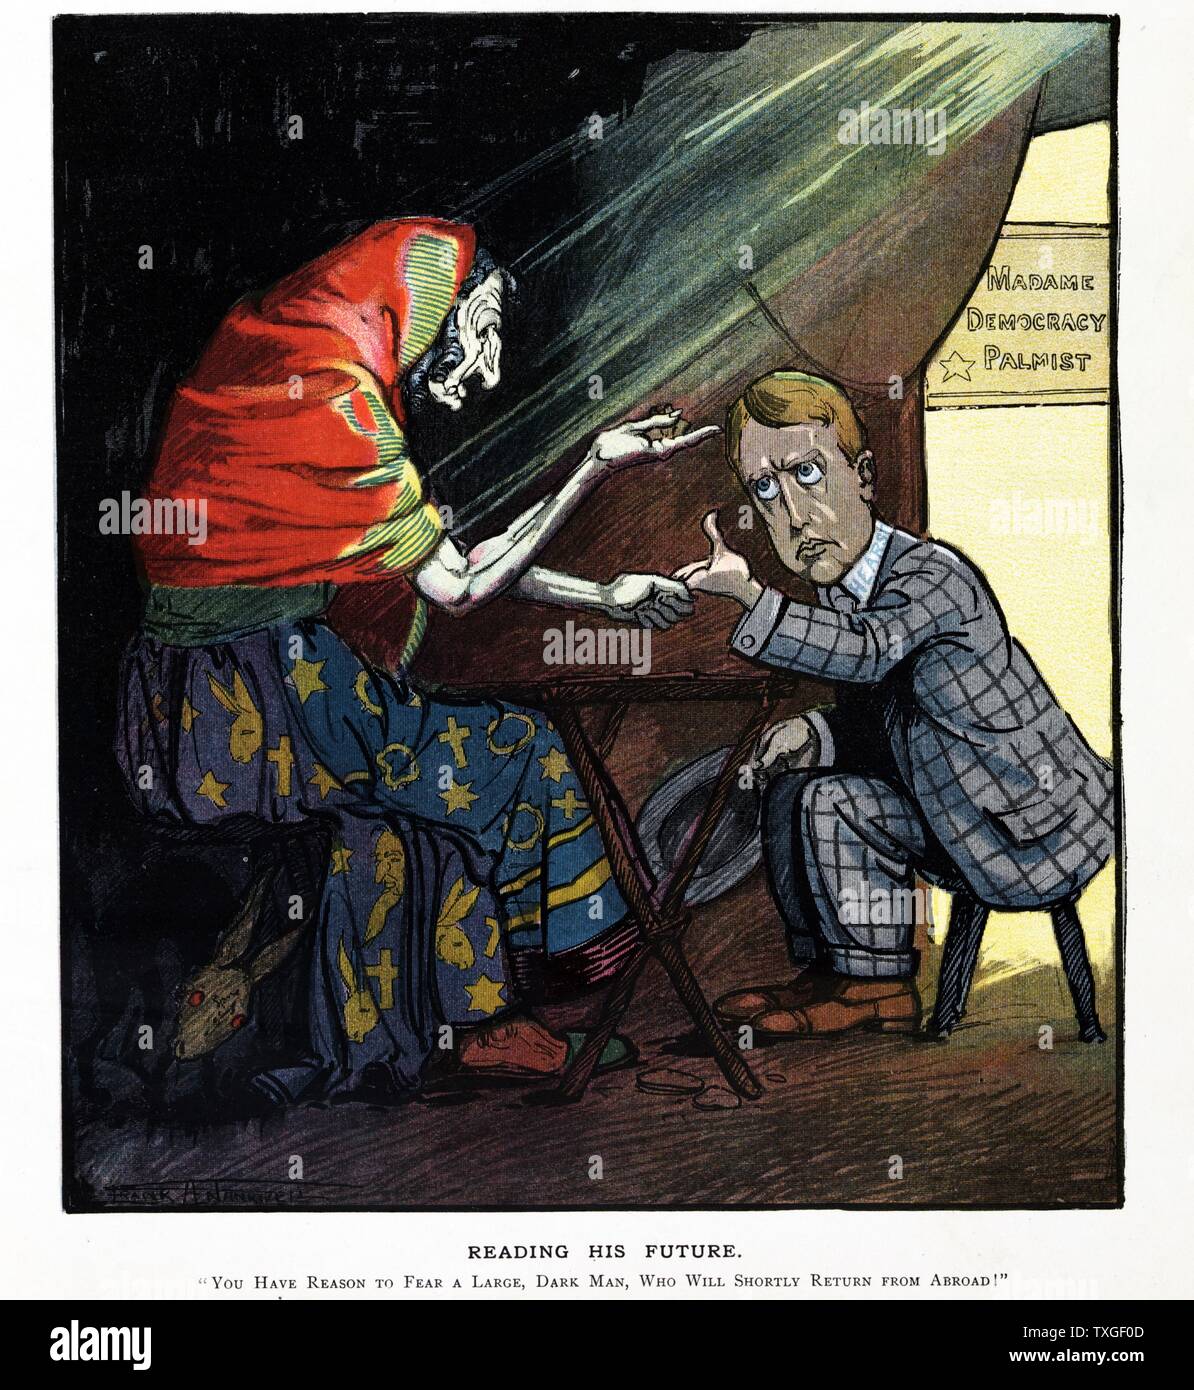 Political satire illustration depicting Madame Democracy Palmist, reading William Randolph Hearst's palm and speaking of the future. Dated 1931 Stock Photo